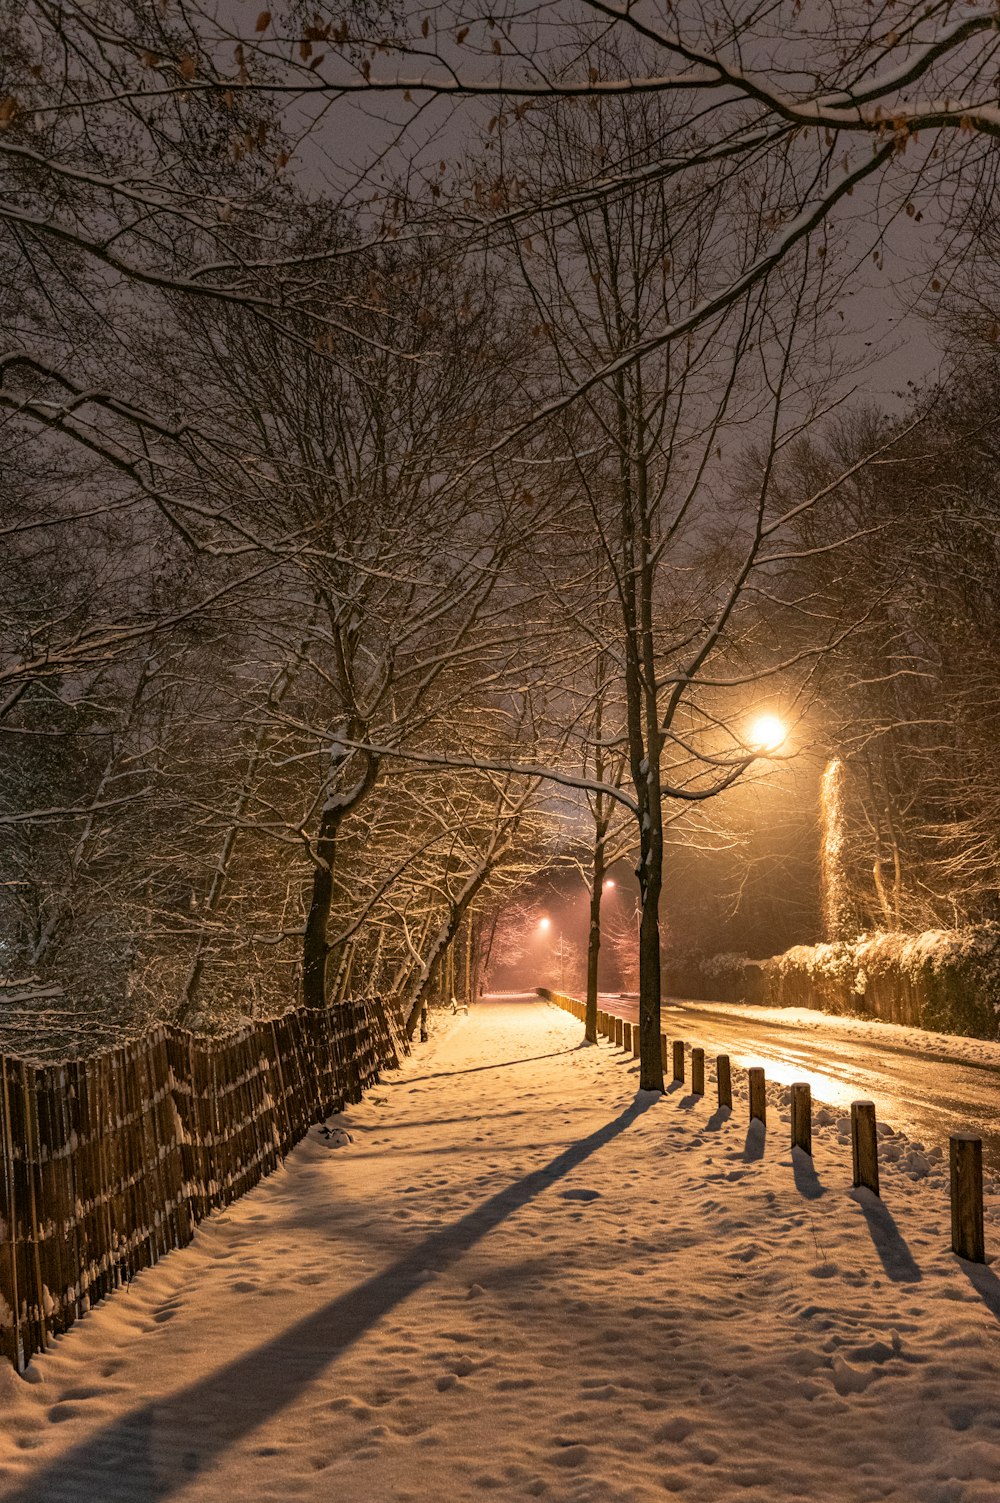 snow covered pathway between bare trees during night time